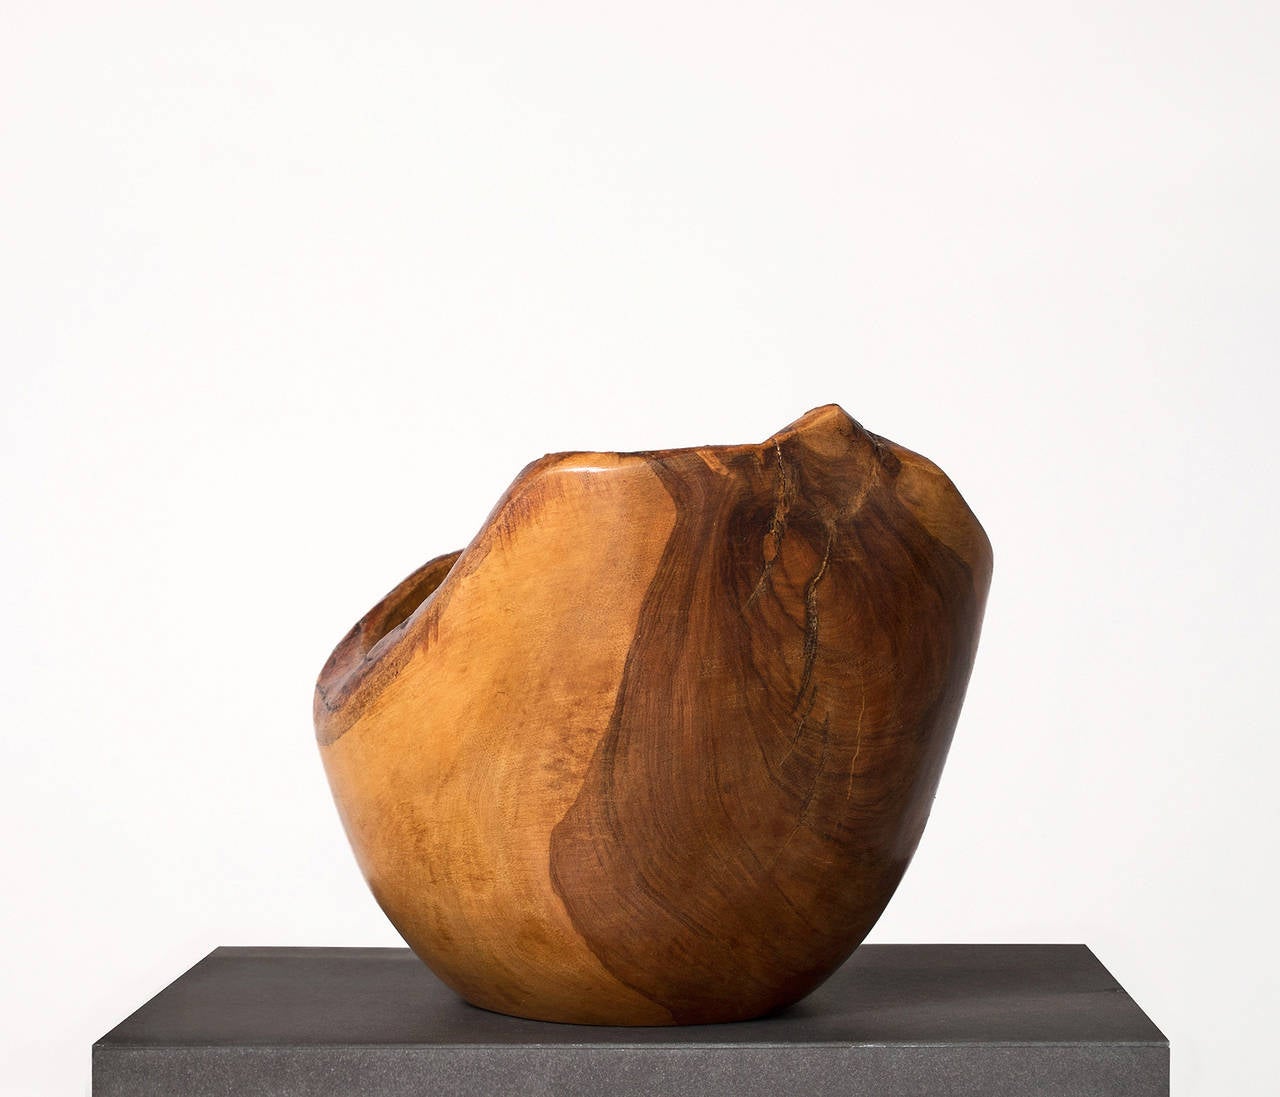 Wonderful wooden bowl, handmade and signed by the French artist Alexandre Noll. 

Very elegant piece with magnificent wood grain. The warm expression of the solid wood shows a fantastic vibrant character. The asymmetric shape and different tones